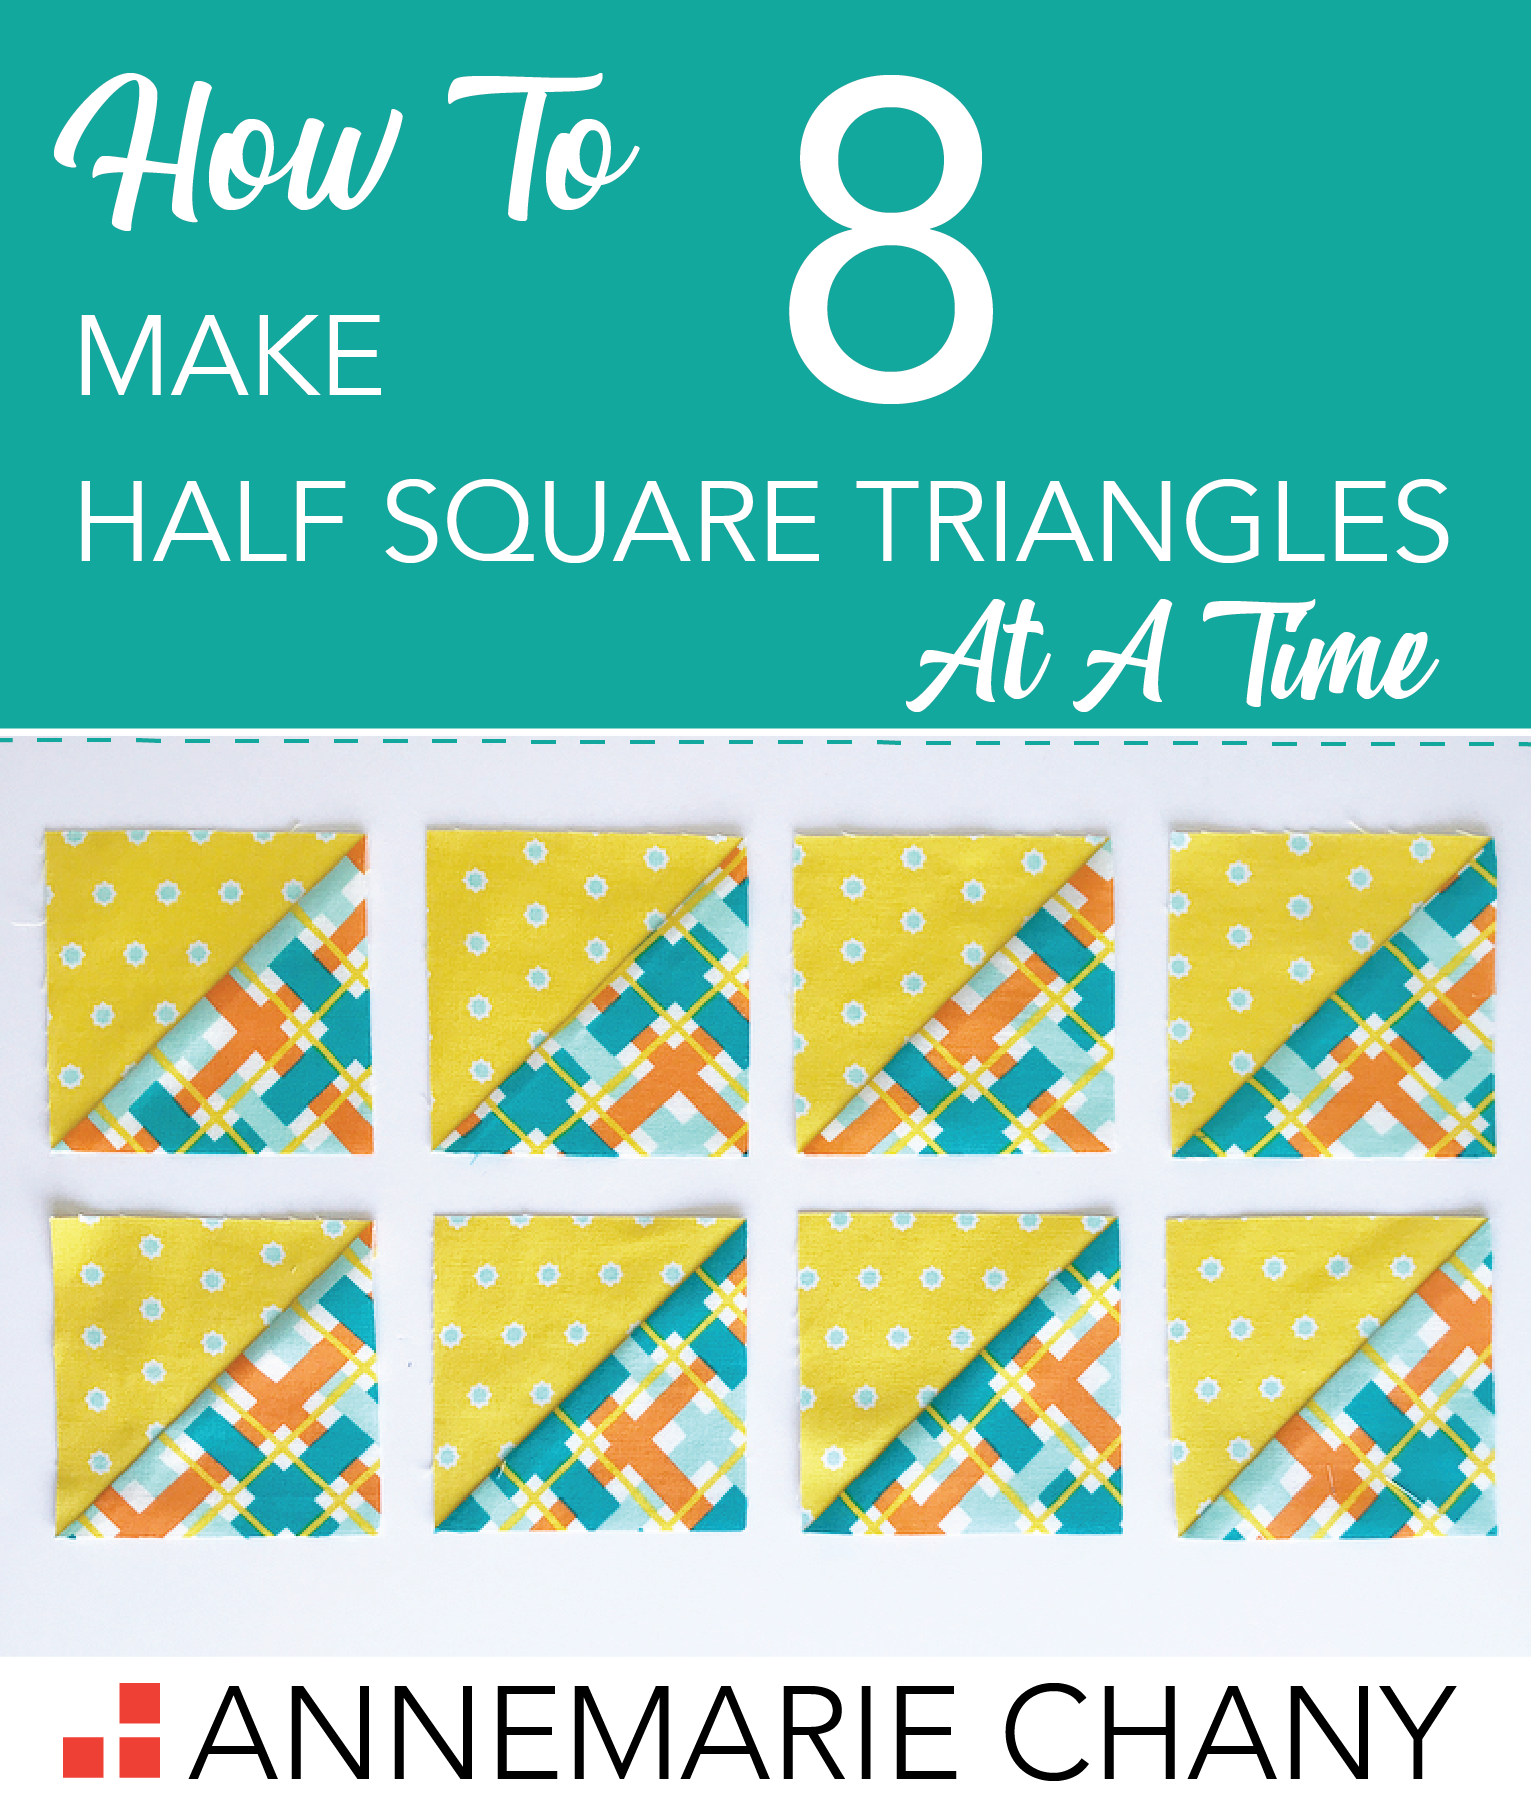 How To Make Half Square Triangles Hsts Eight At A Time Quilt Block Tutorial Annemarie Chany,Marriage Vows Traditional